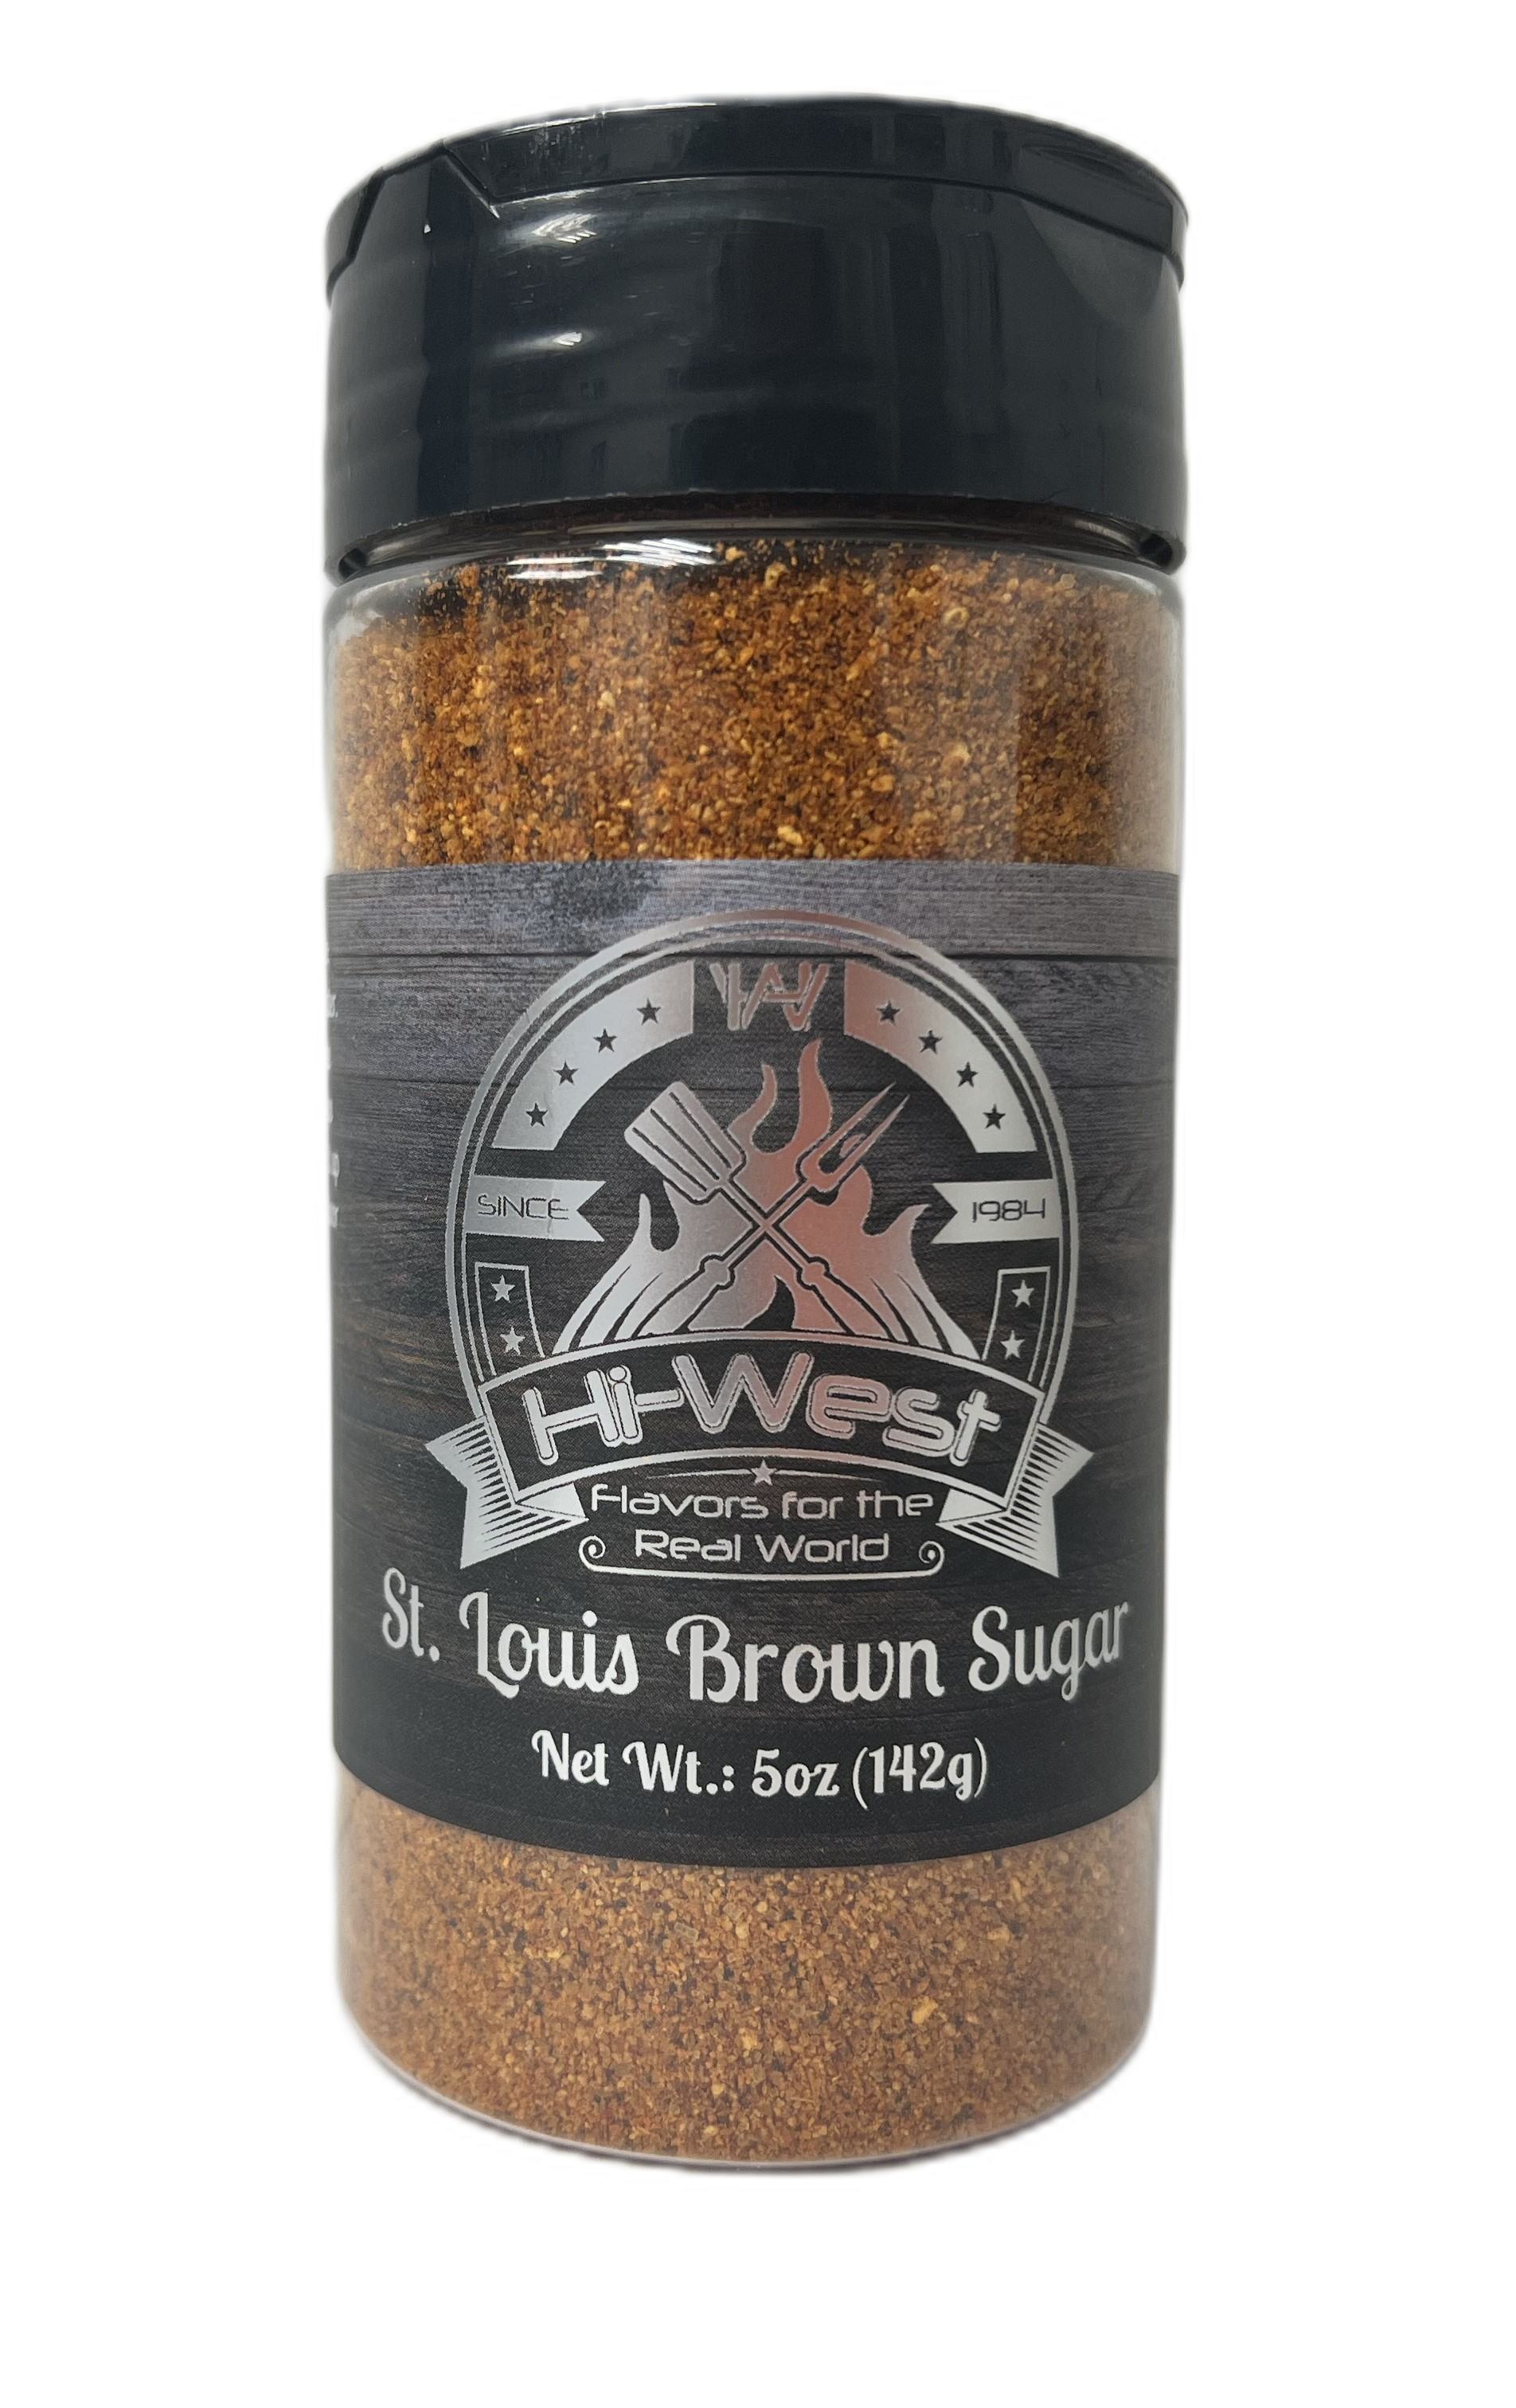 About - Louie's Seasoning